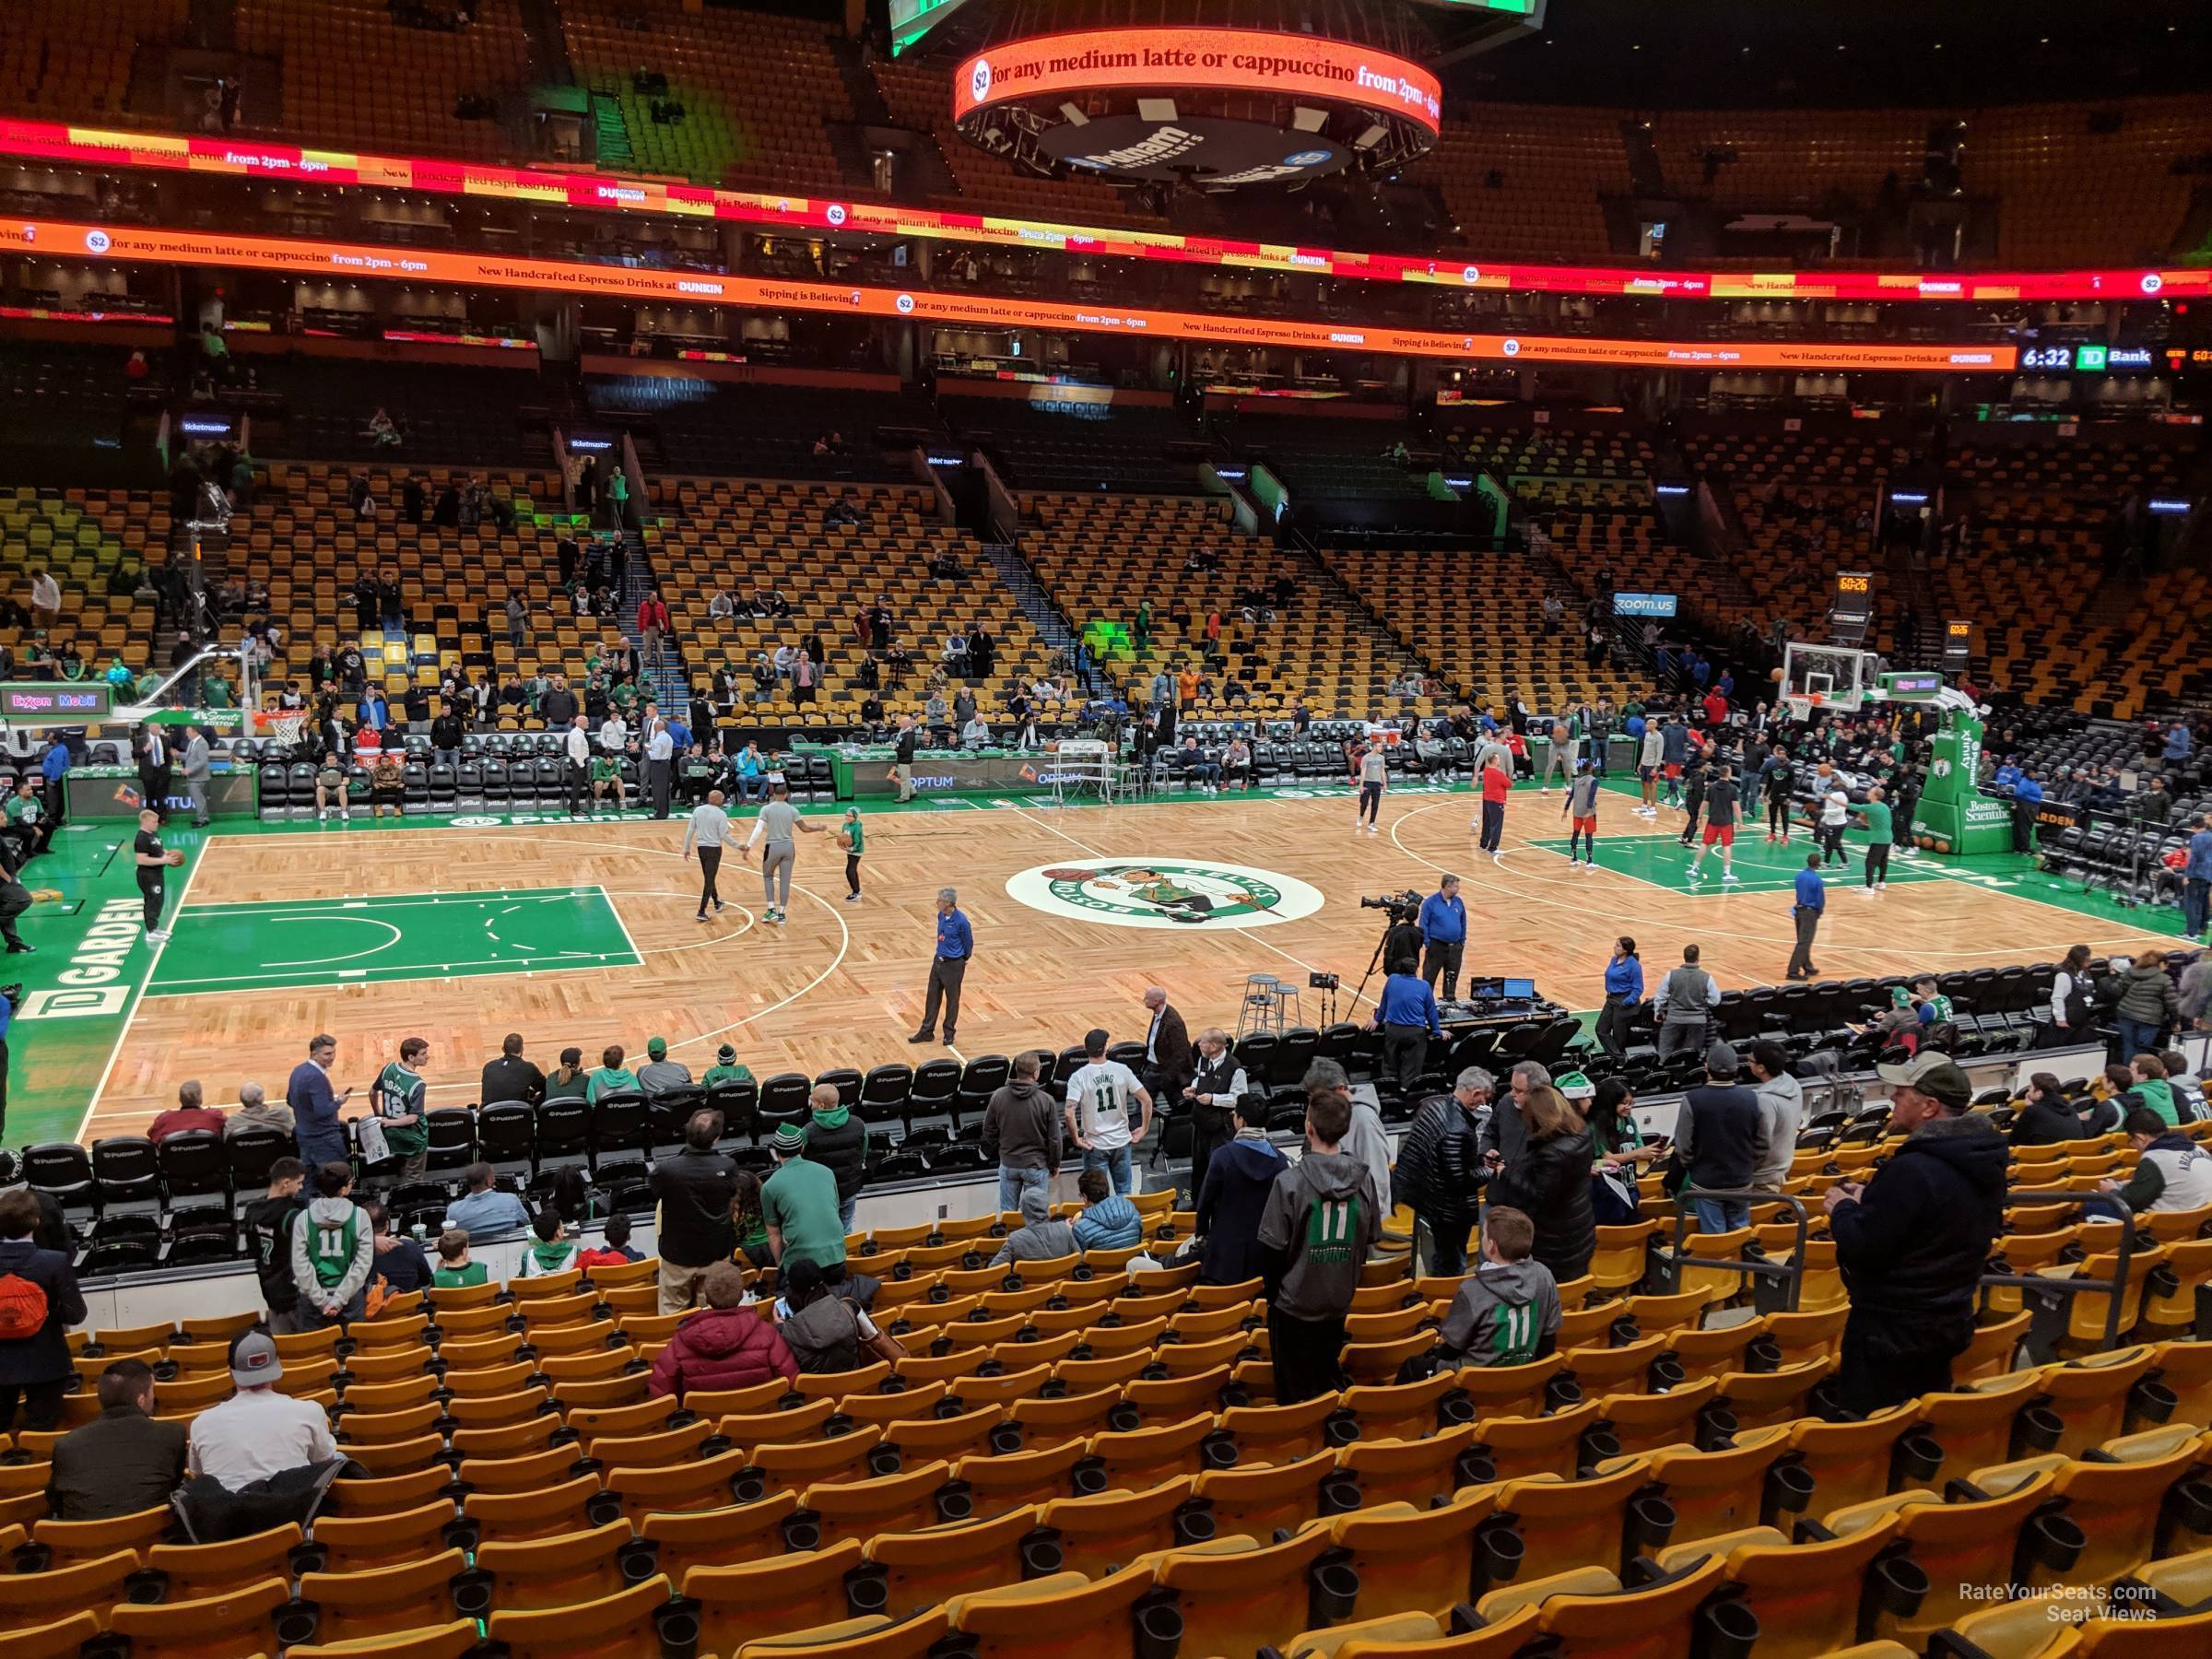 loge 13, row 16 seat view  for basketball - td garden